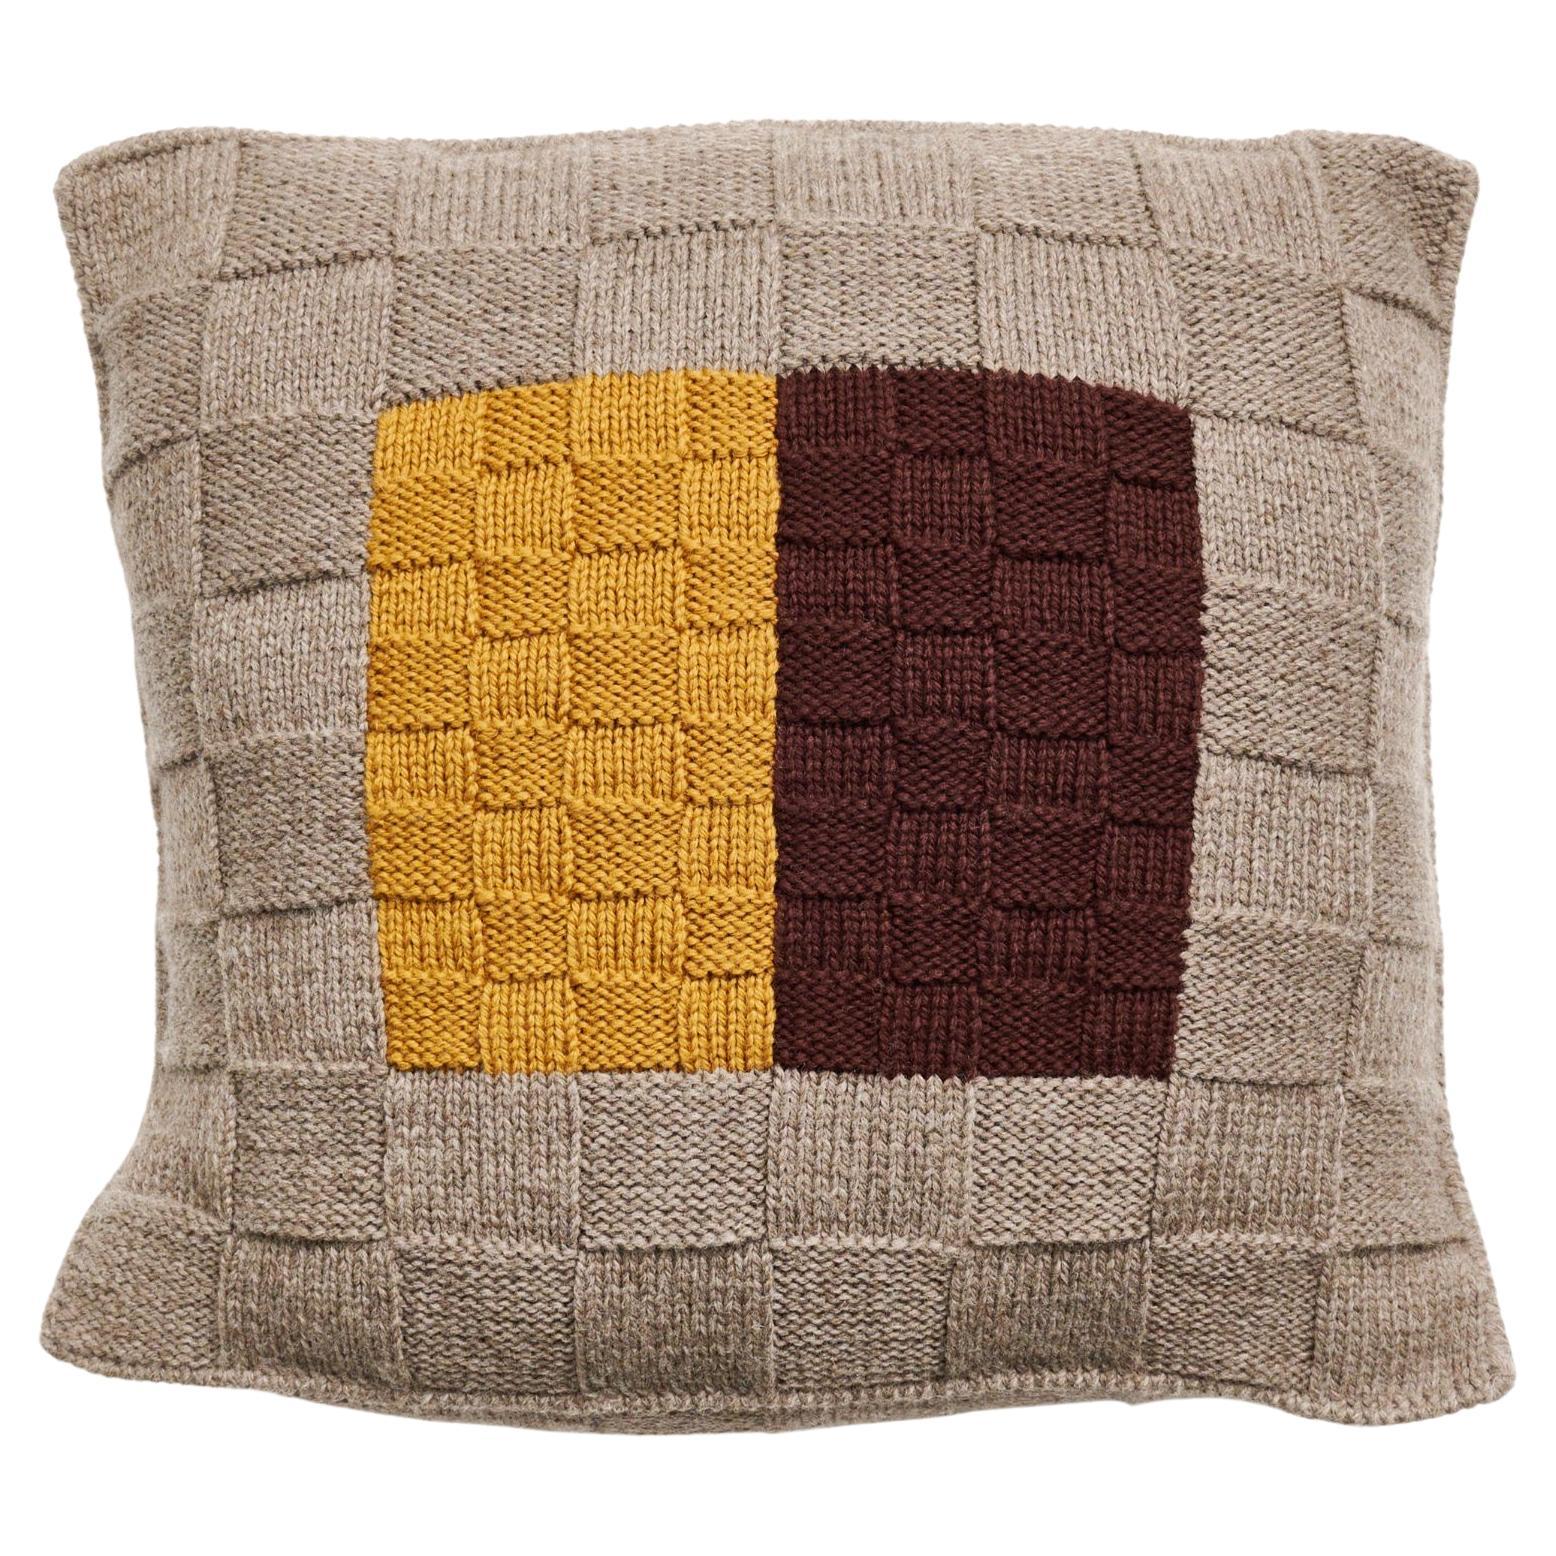 Andes Topaz Pillow Hand Knitted By Peruvian Artisans in Andean Highland Wool For Sale